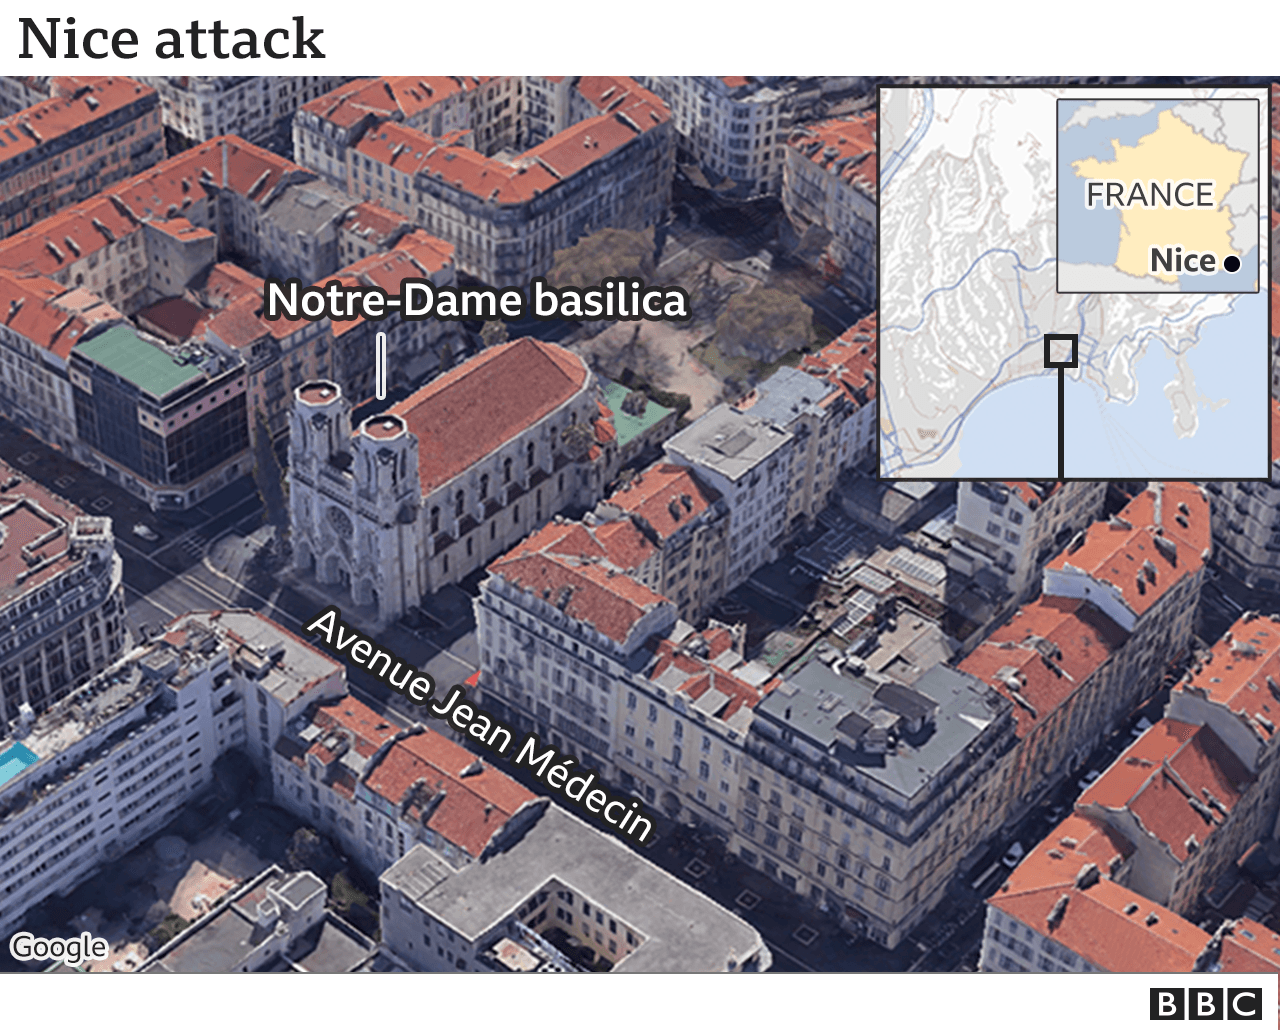 Map showing Notre-Dame basilica